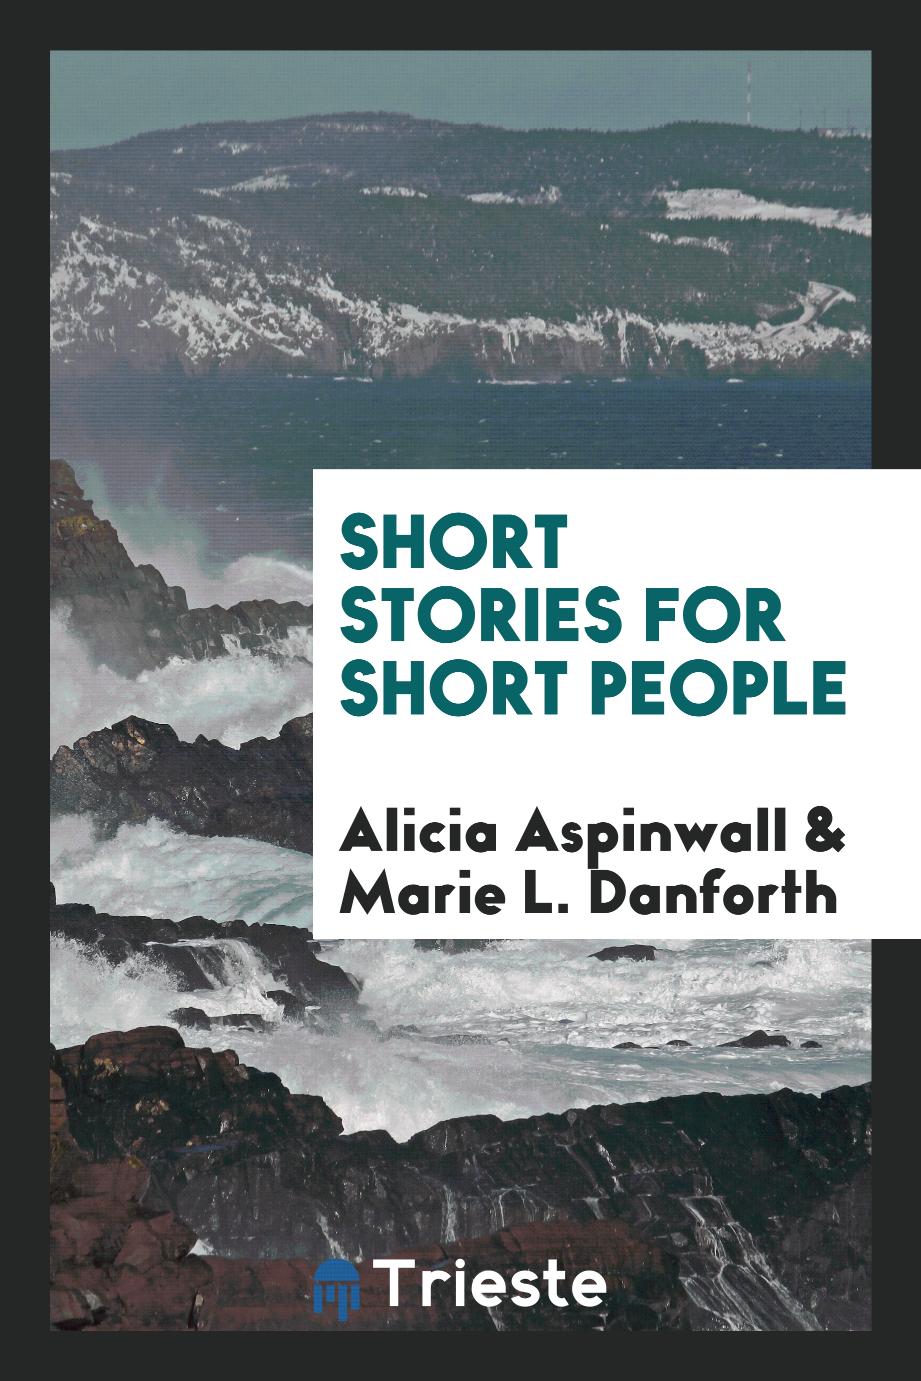 Short stories for short people